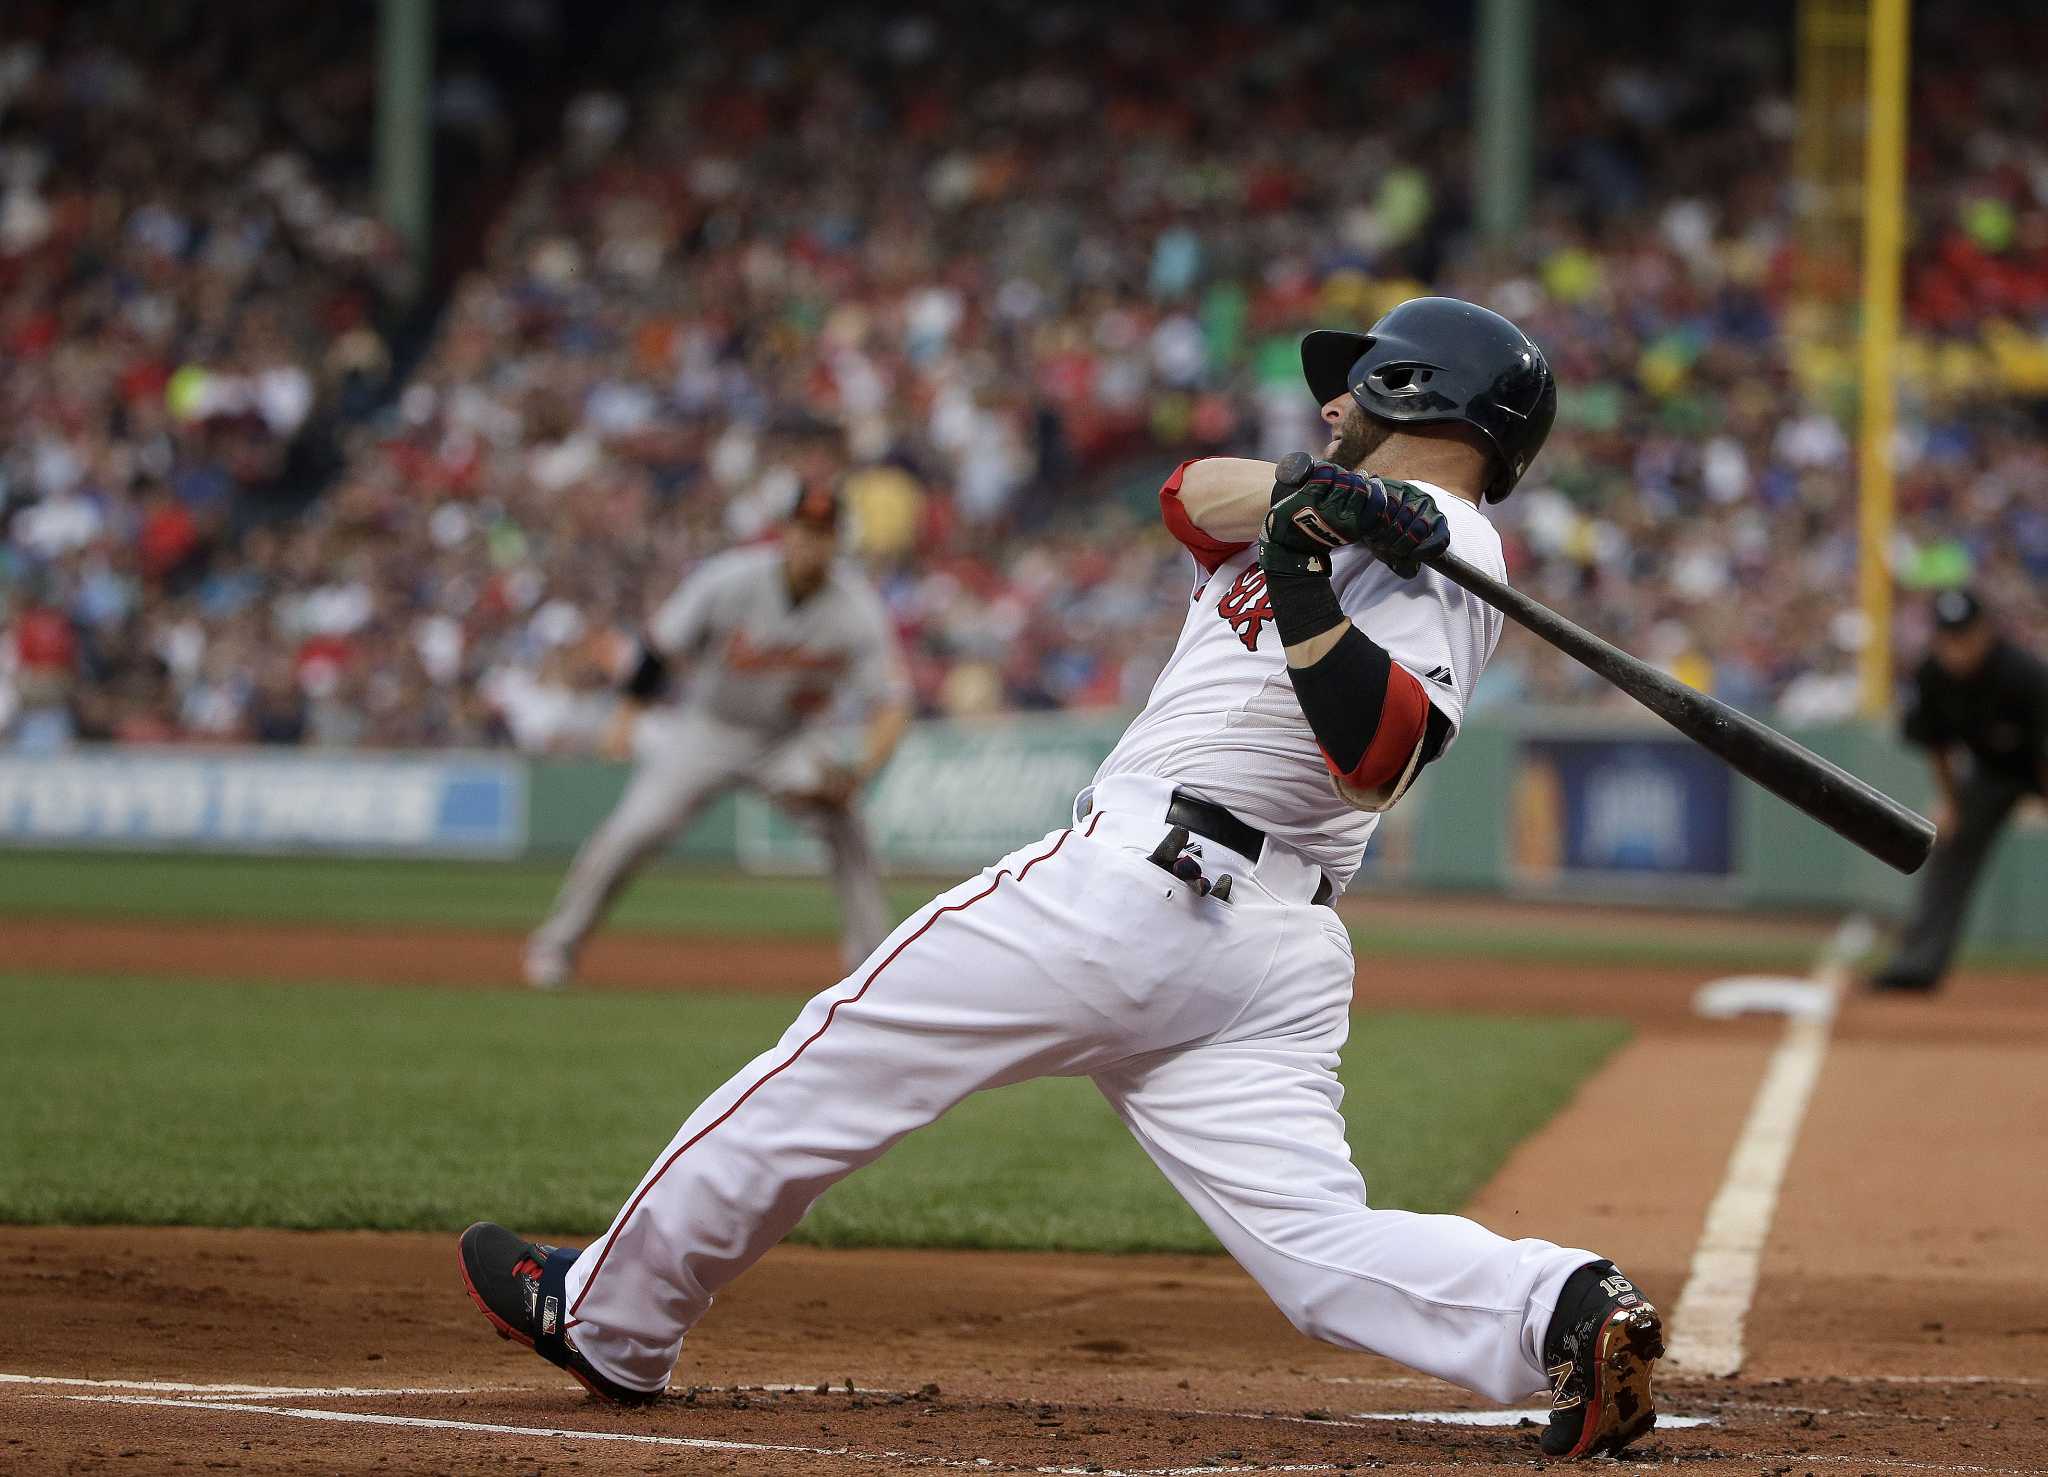 Dustin Pedroia, Boston Red Sox Second Baseman And 4-Time All-Star